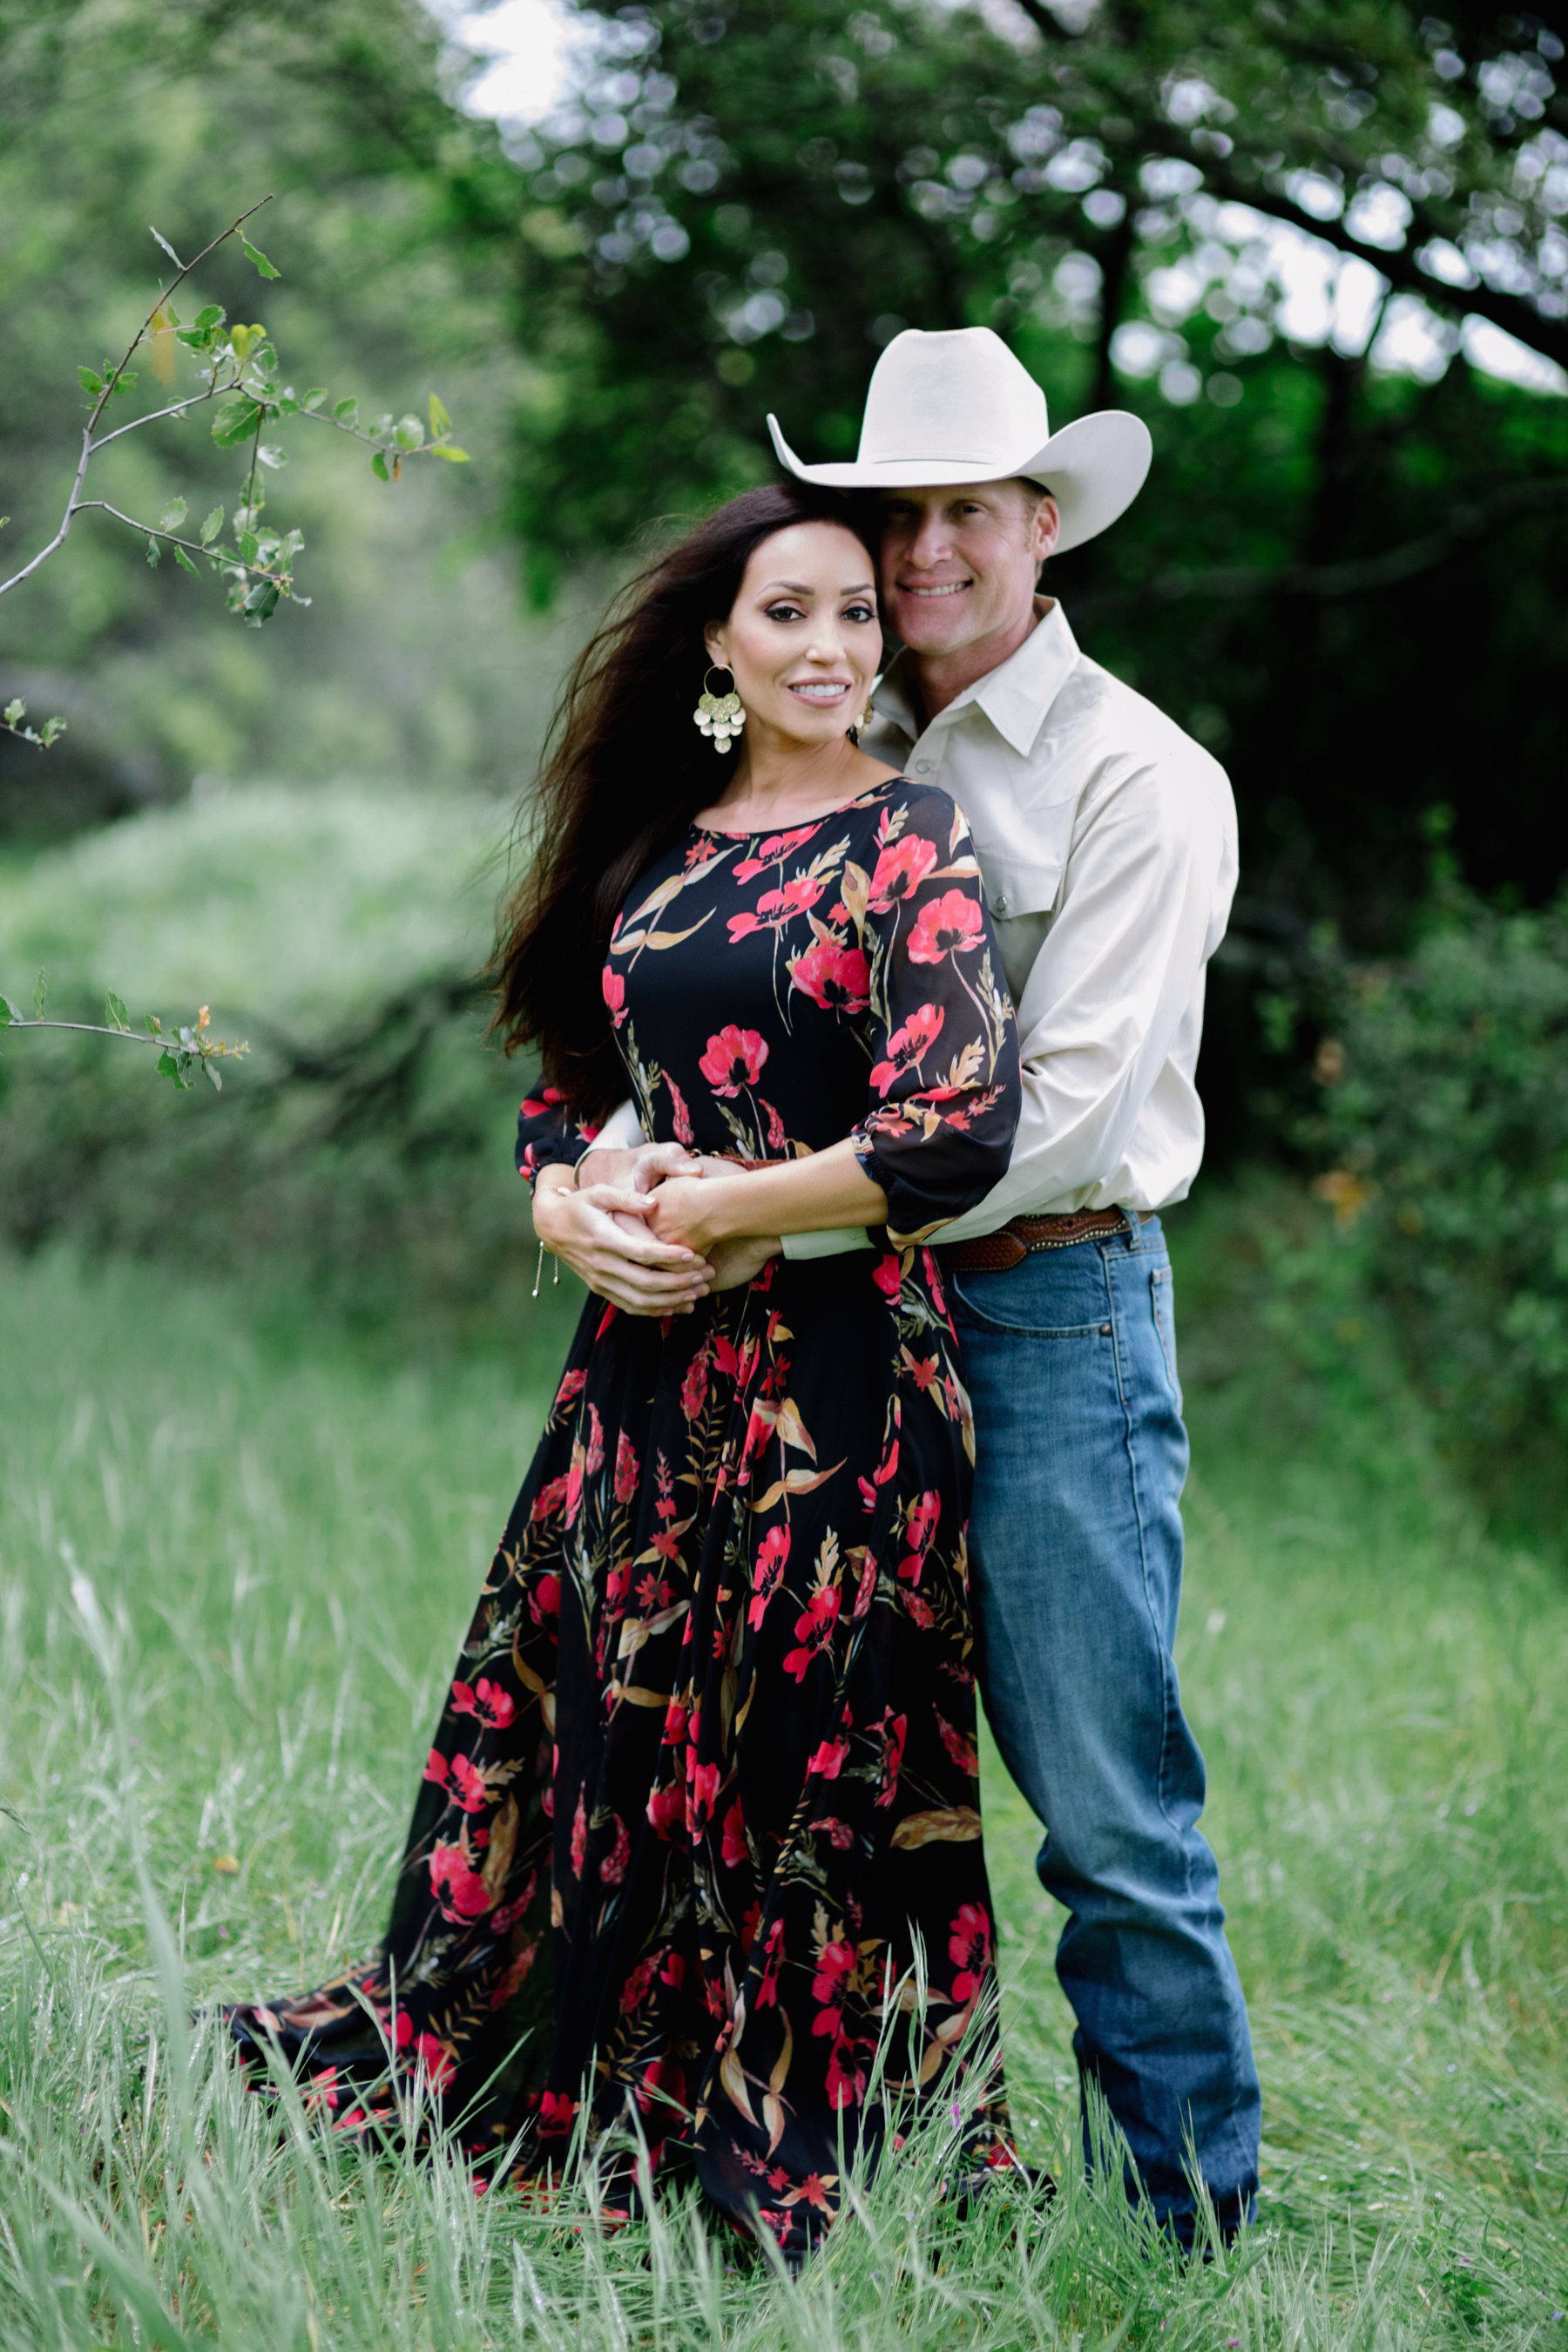 cowboy hat engagement session by the lake and woods in Northern California - Diana Elizabeth photography - www.dianaelizabeth.com